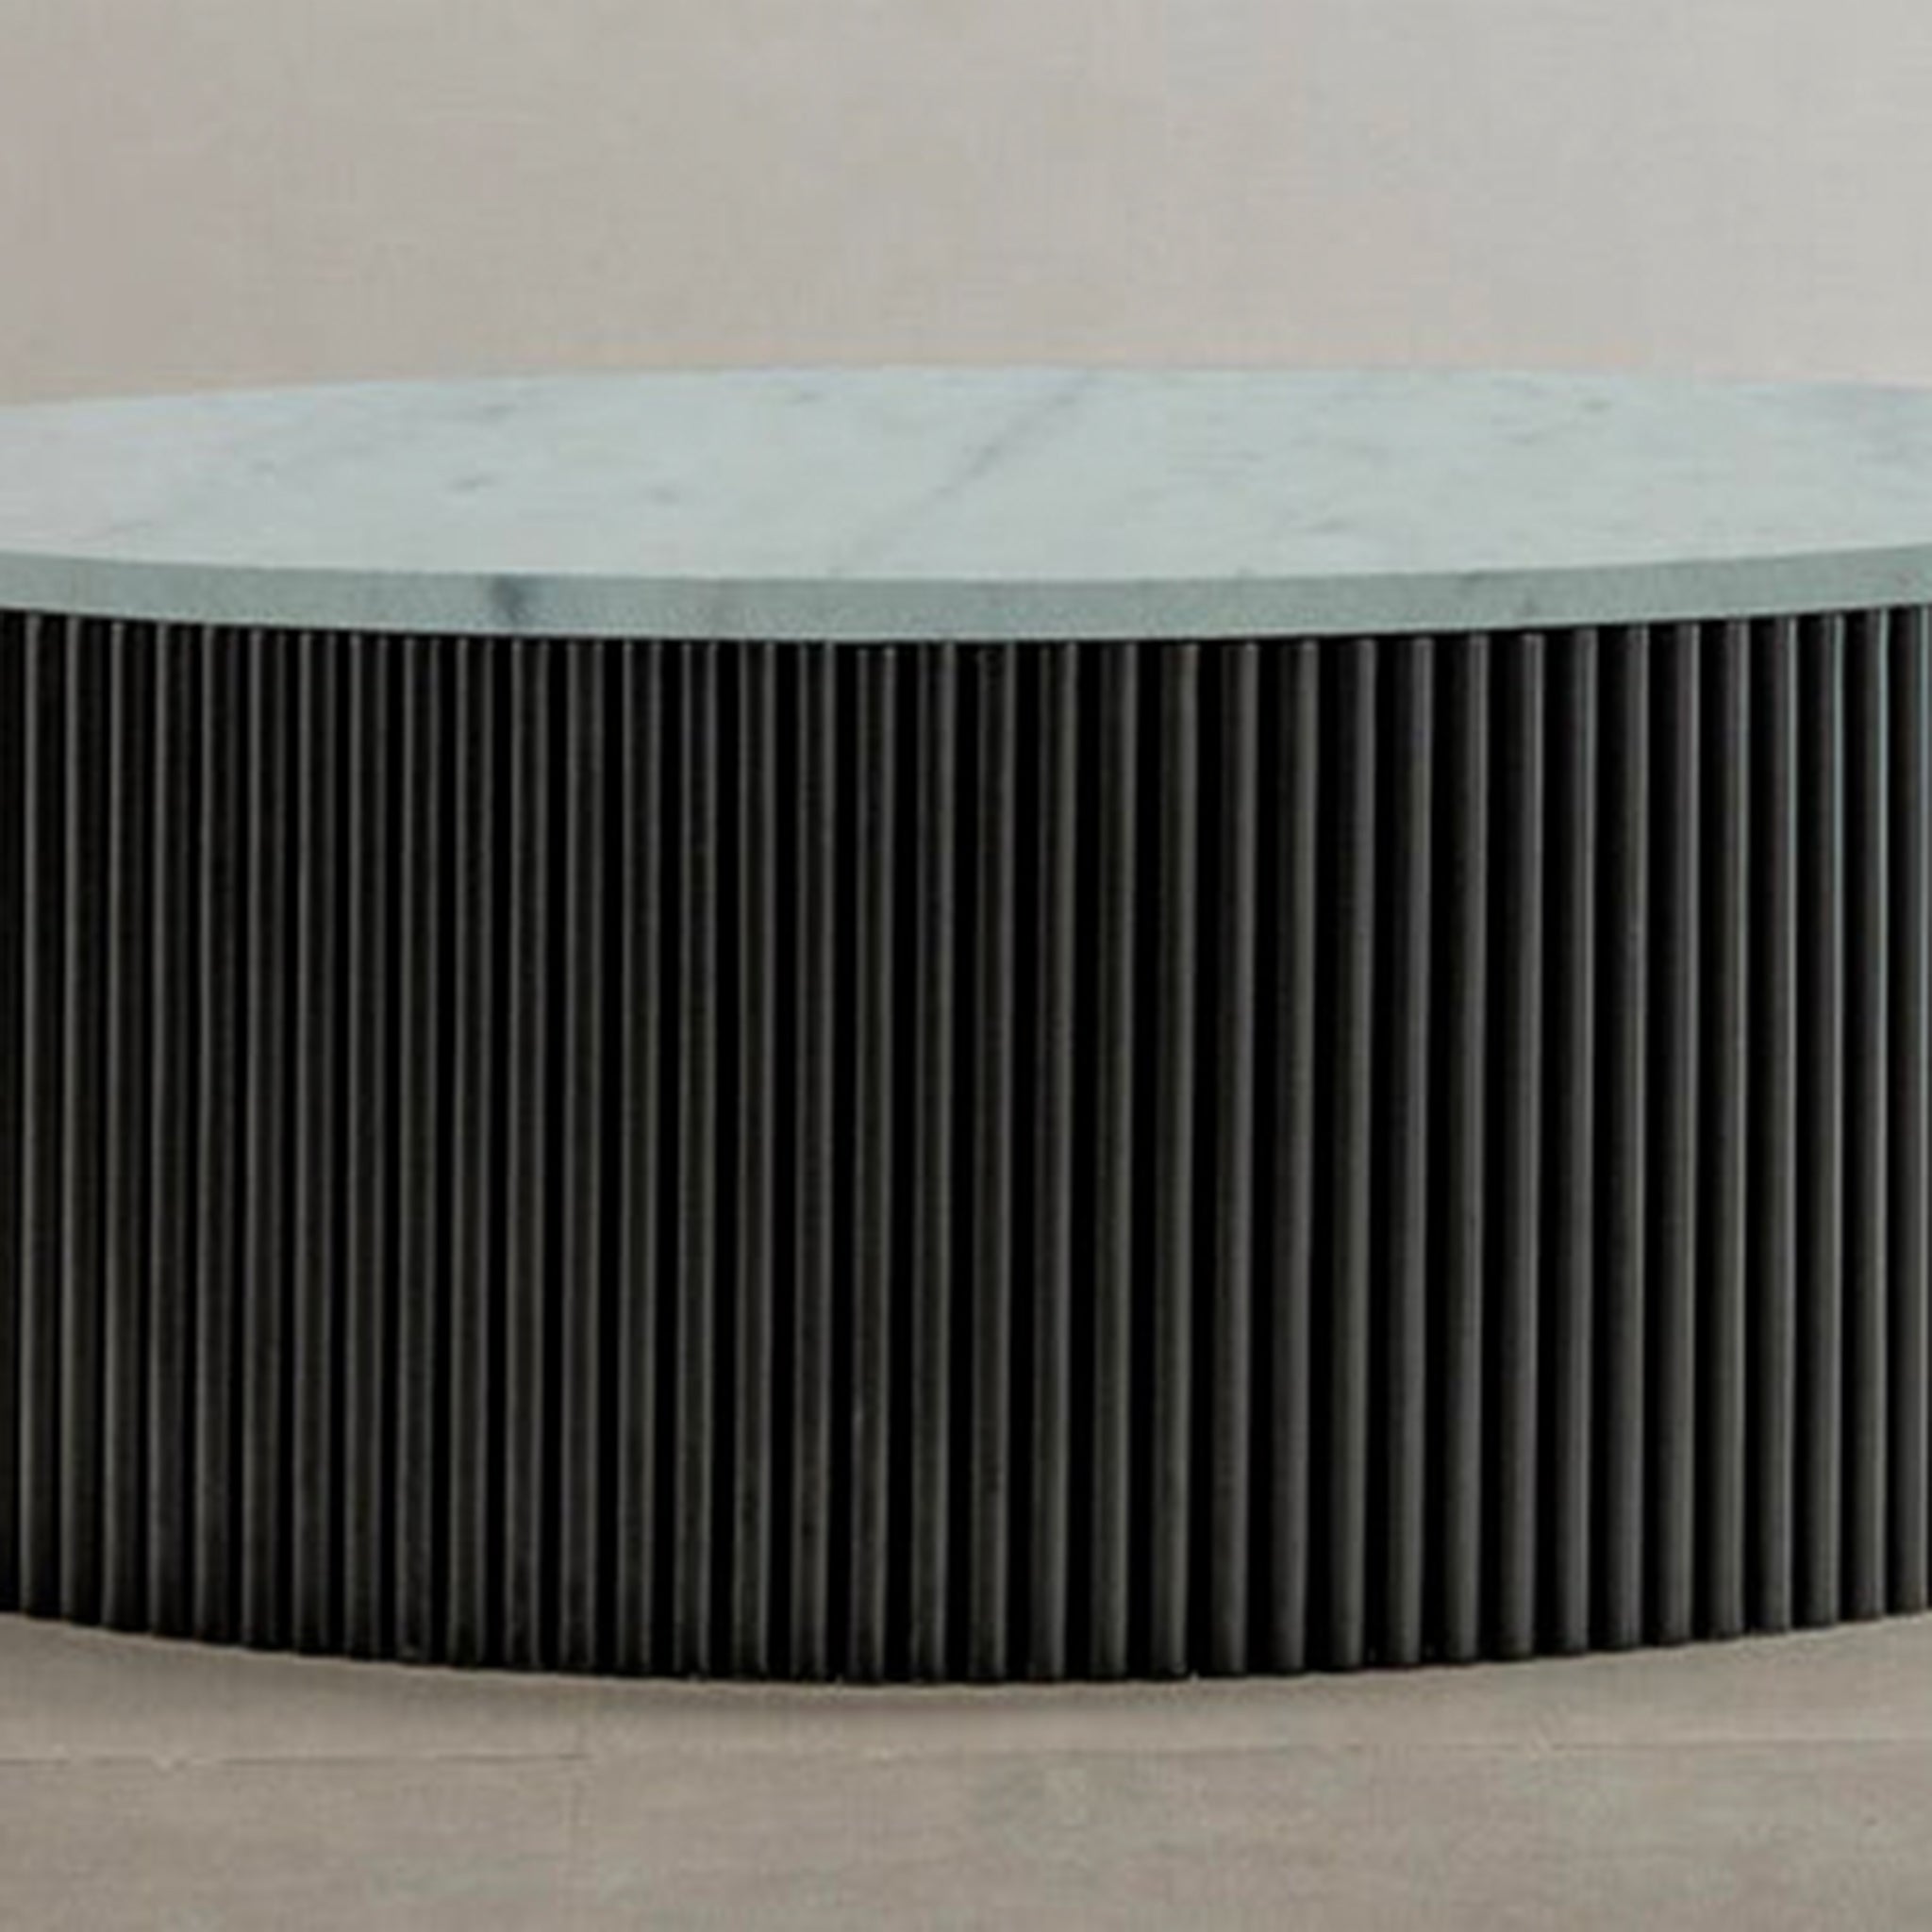 "Elegant coffee table with ribbed base and smooth green top"